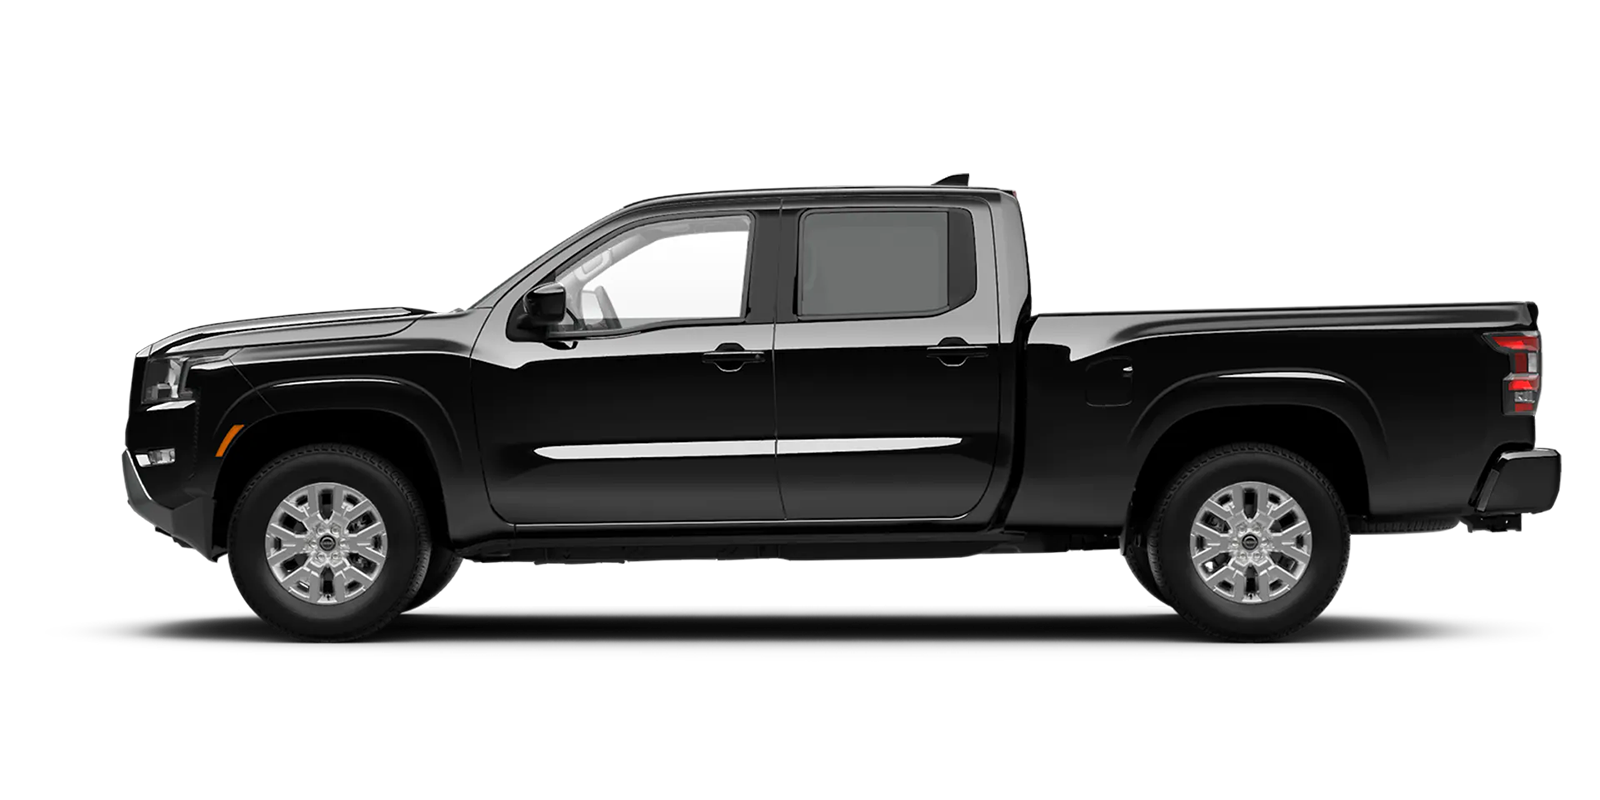 2022 Frontier Crew Cab Long Bed SV 4x4 in Super Black | Wallace Nissan of Kingsport in Kingsport TN